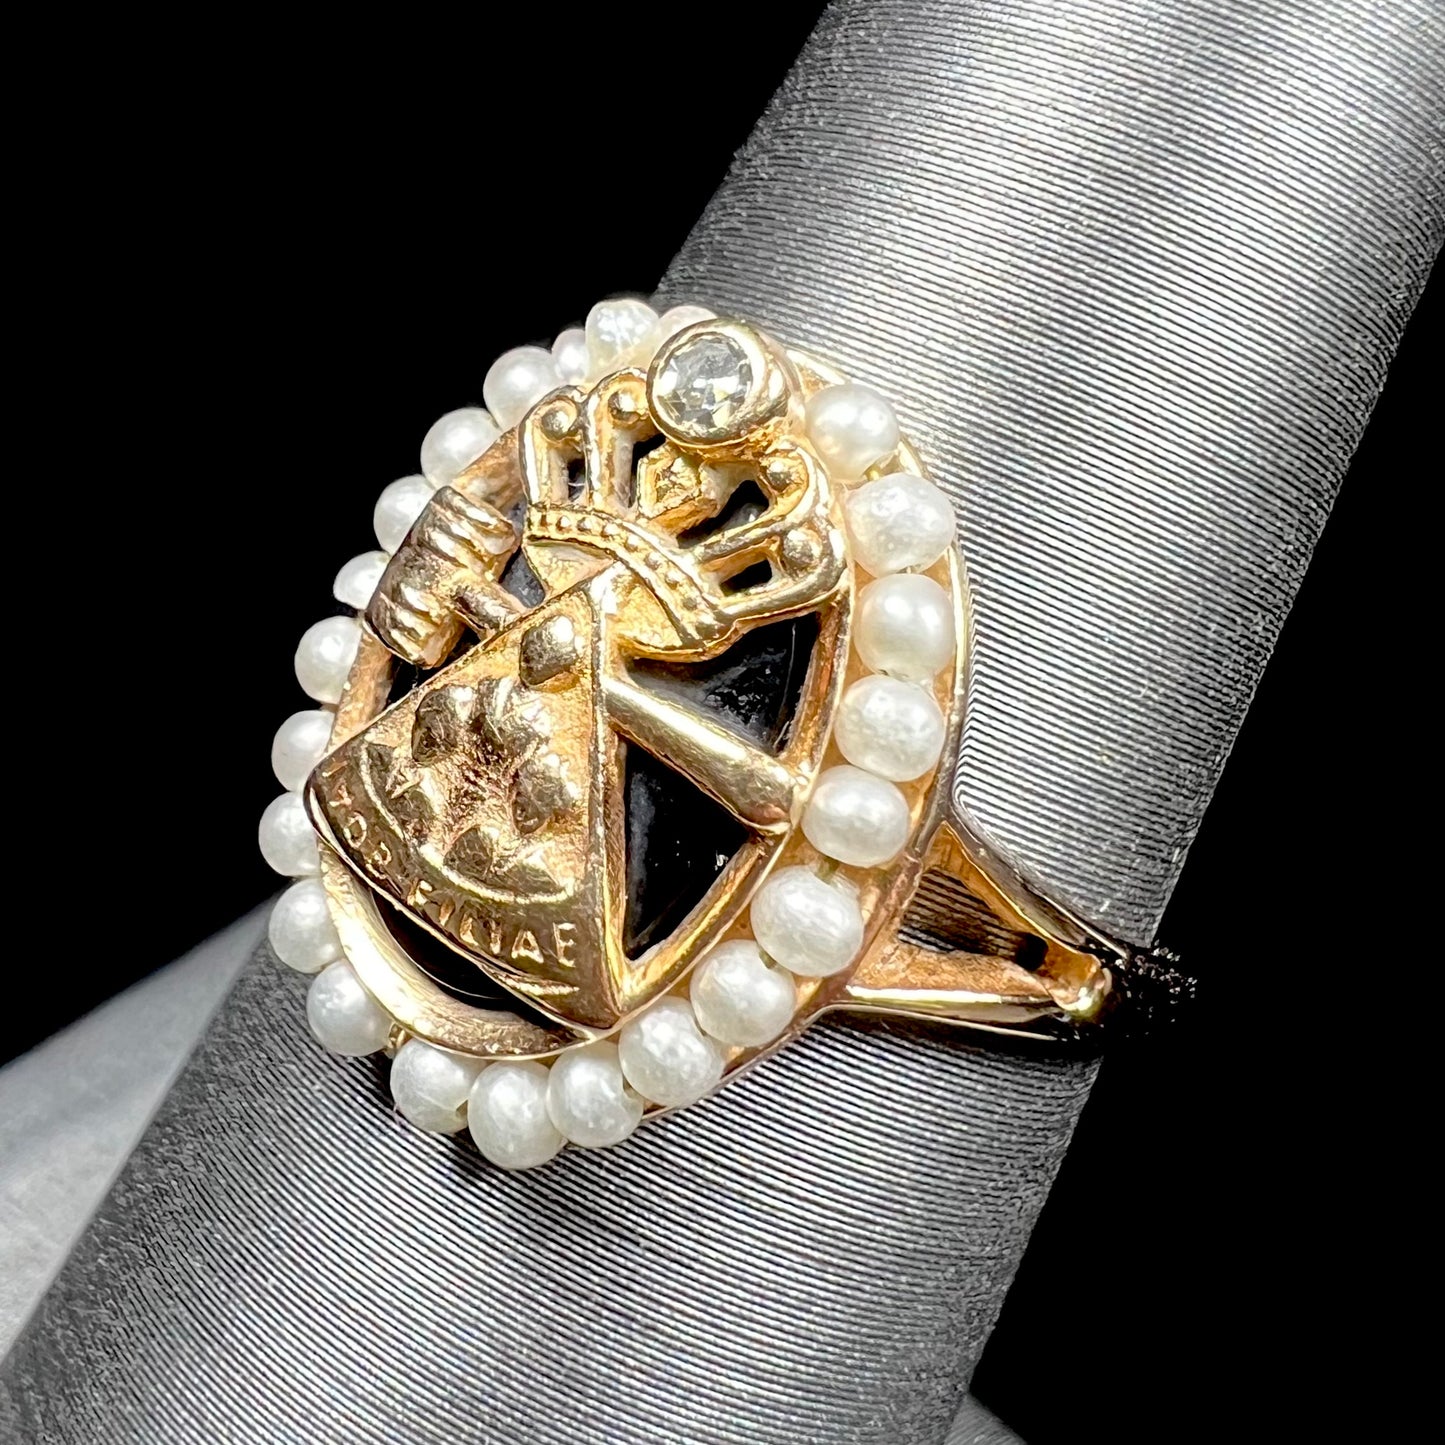 A ladies' Job's Daughters youth organization ring cast in 14 karat gold, set with a diamond and string of pearls.